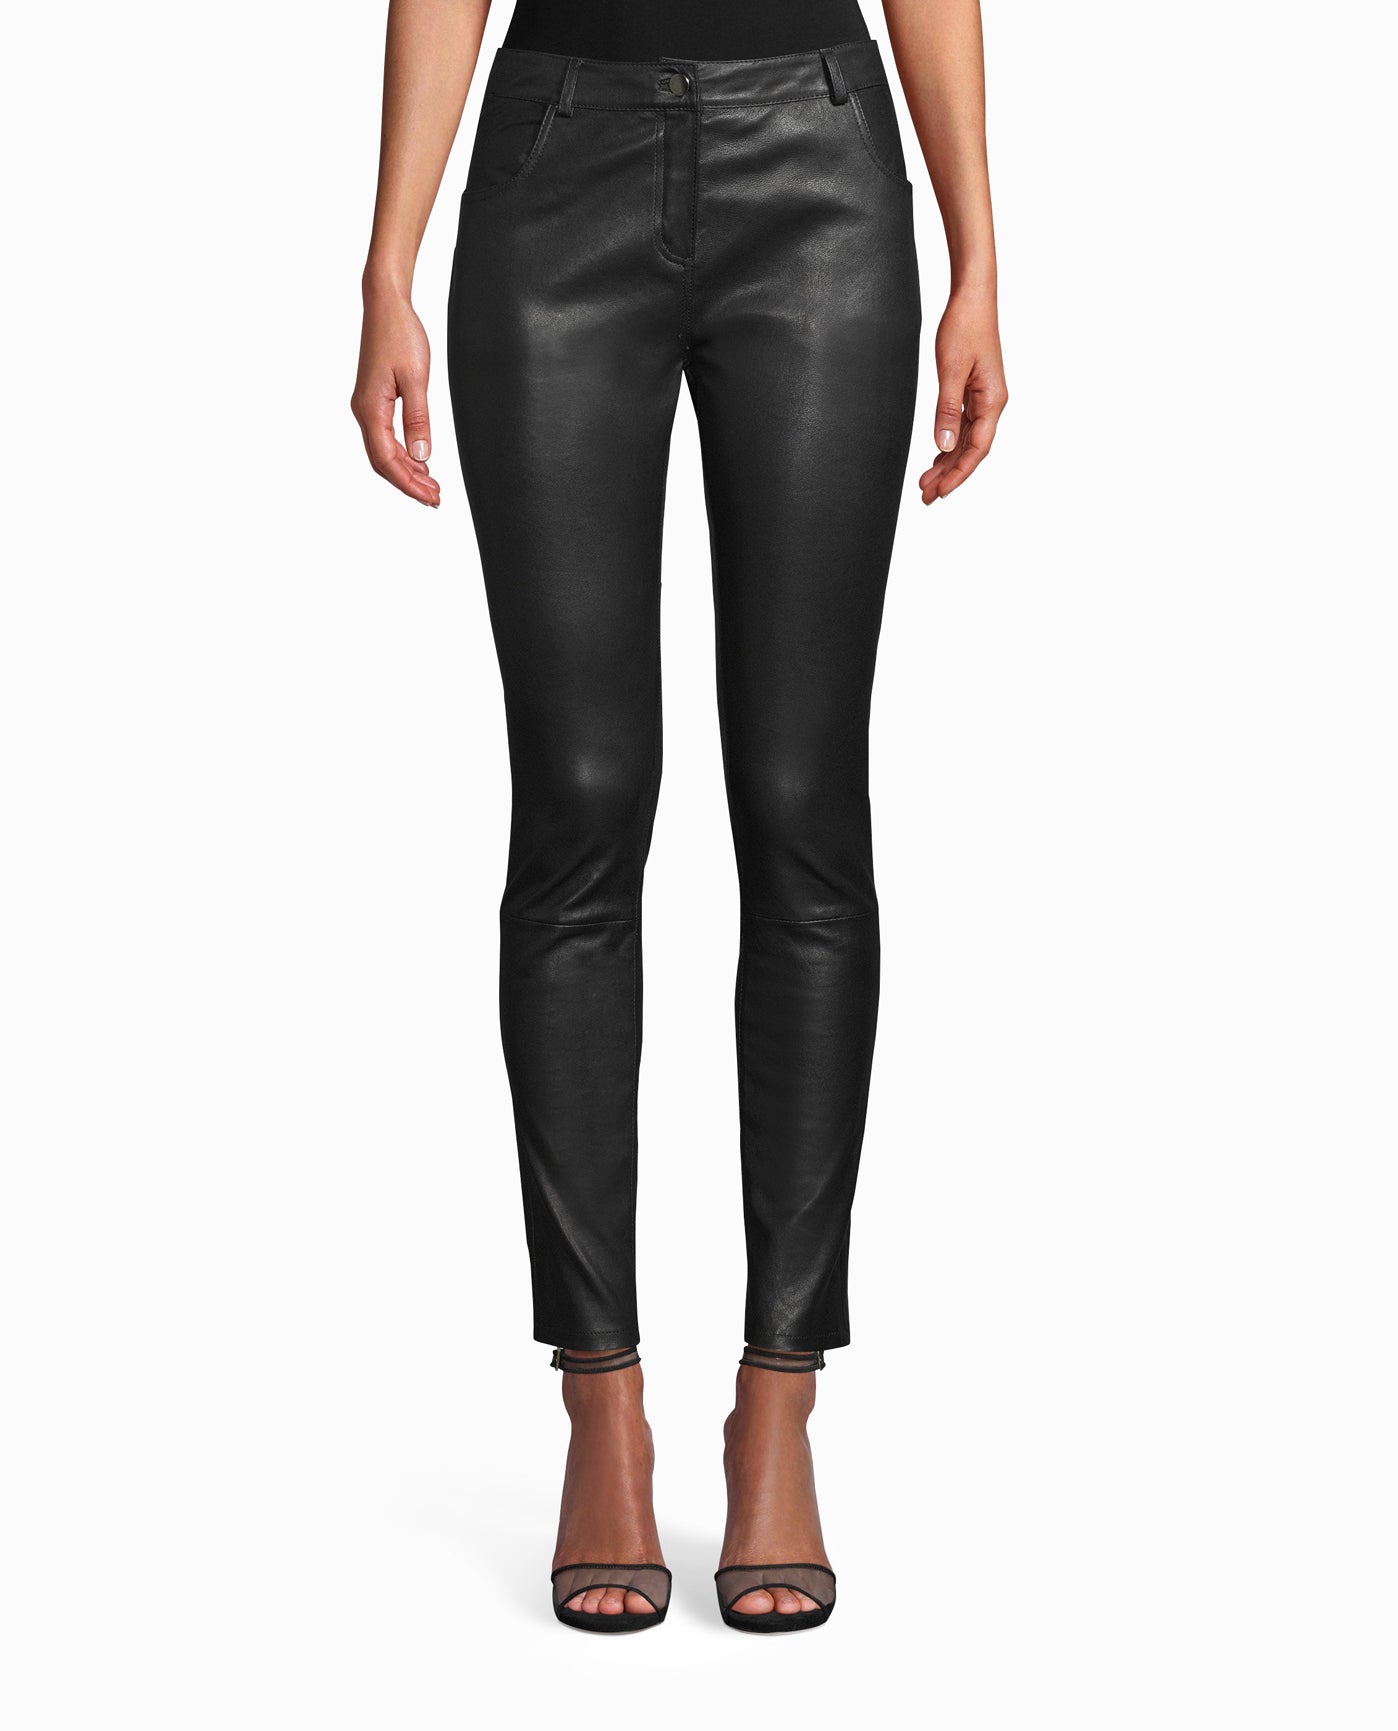 metrostyle Leather Pants for Women for sale | eBay